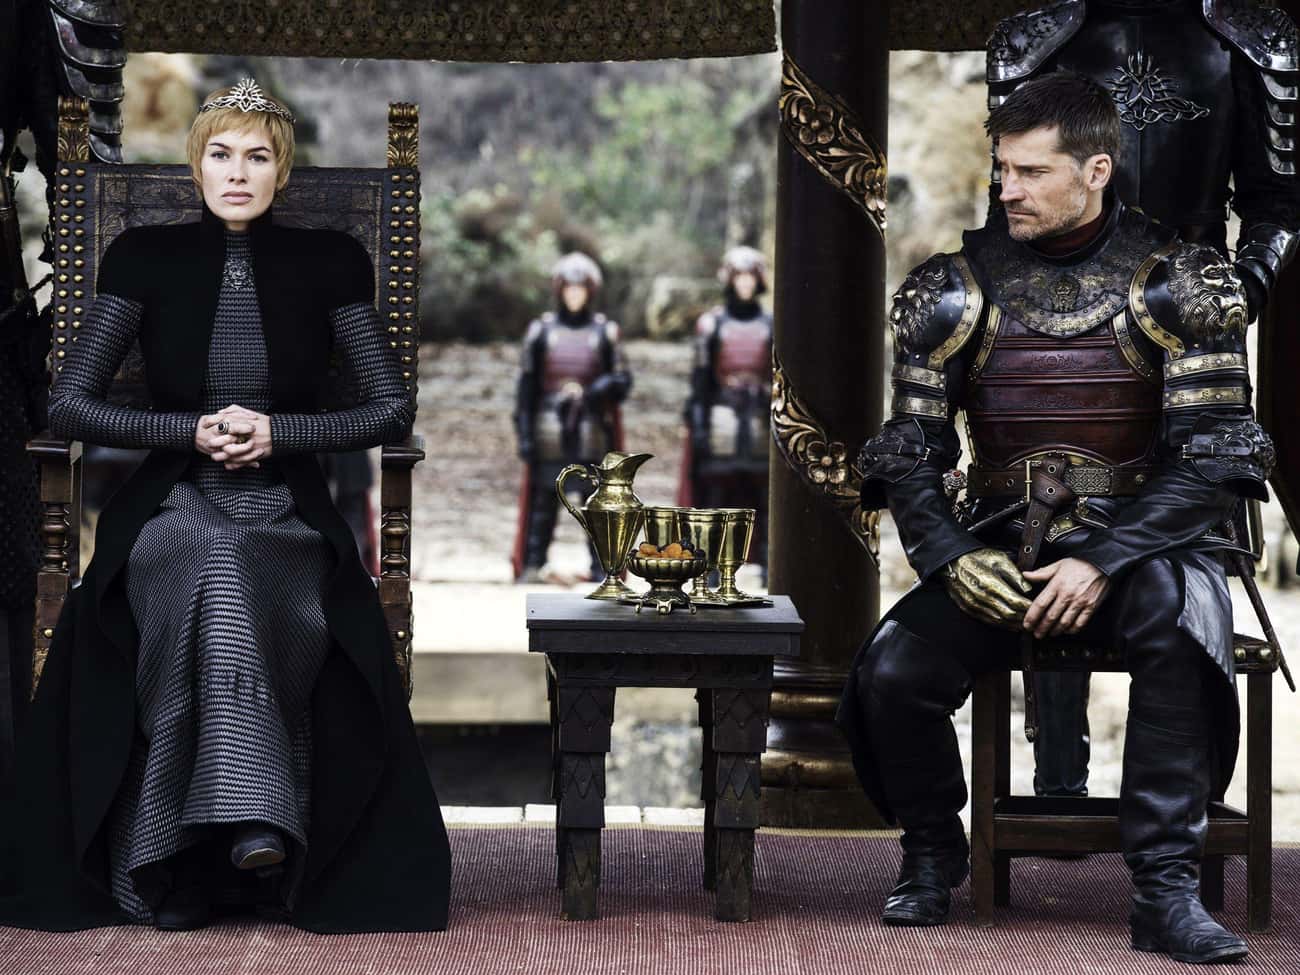 Cersei Reveals Her Pregnancy And Intended Betrayal, Leading Jaime To Finally Leave Her Side 